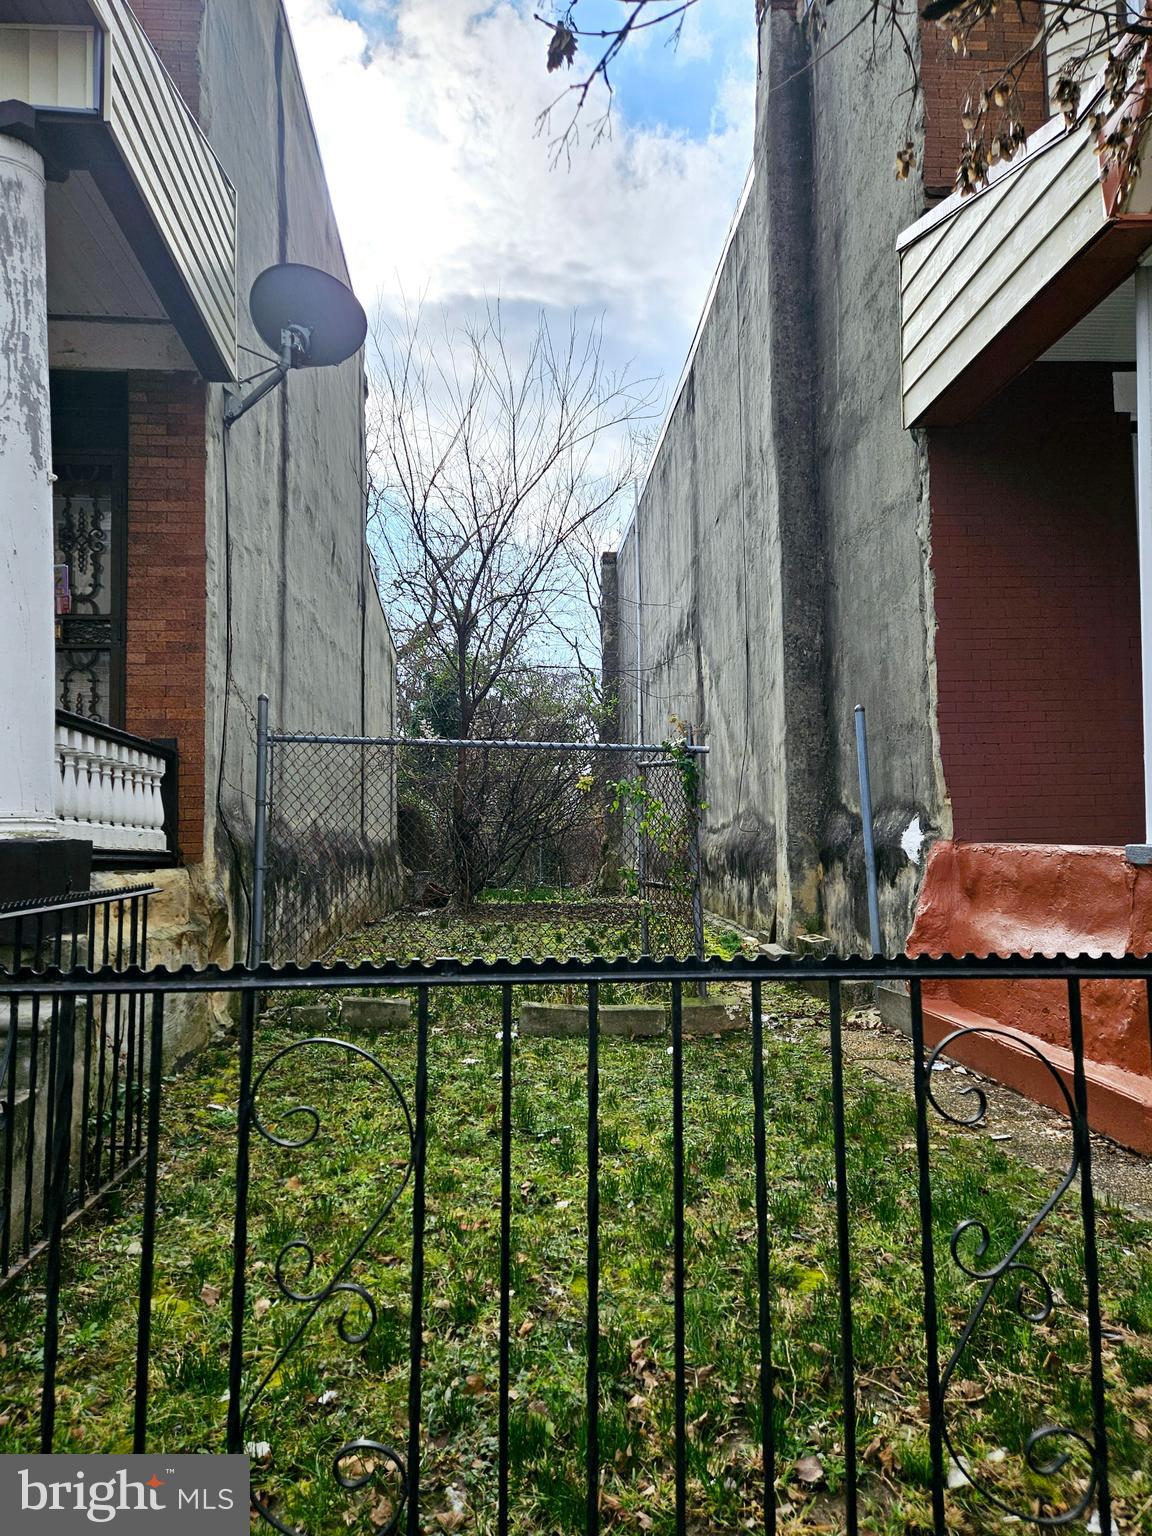 a view of a house with a fence